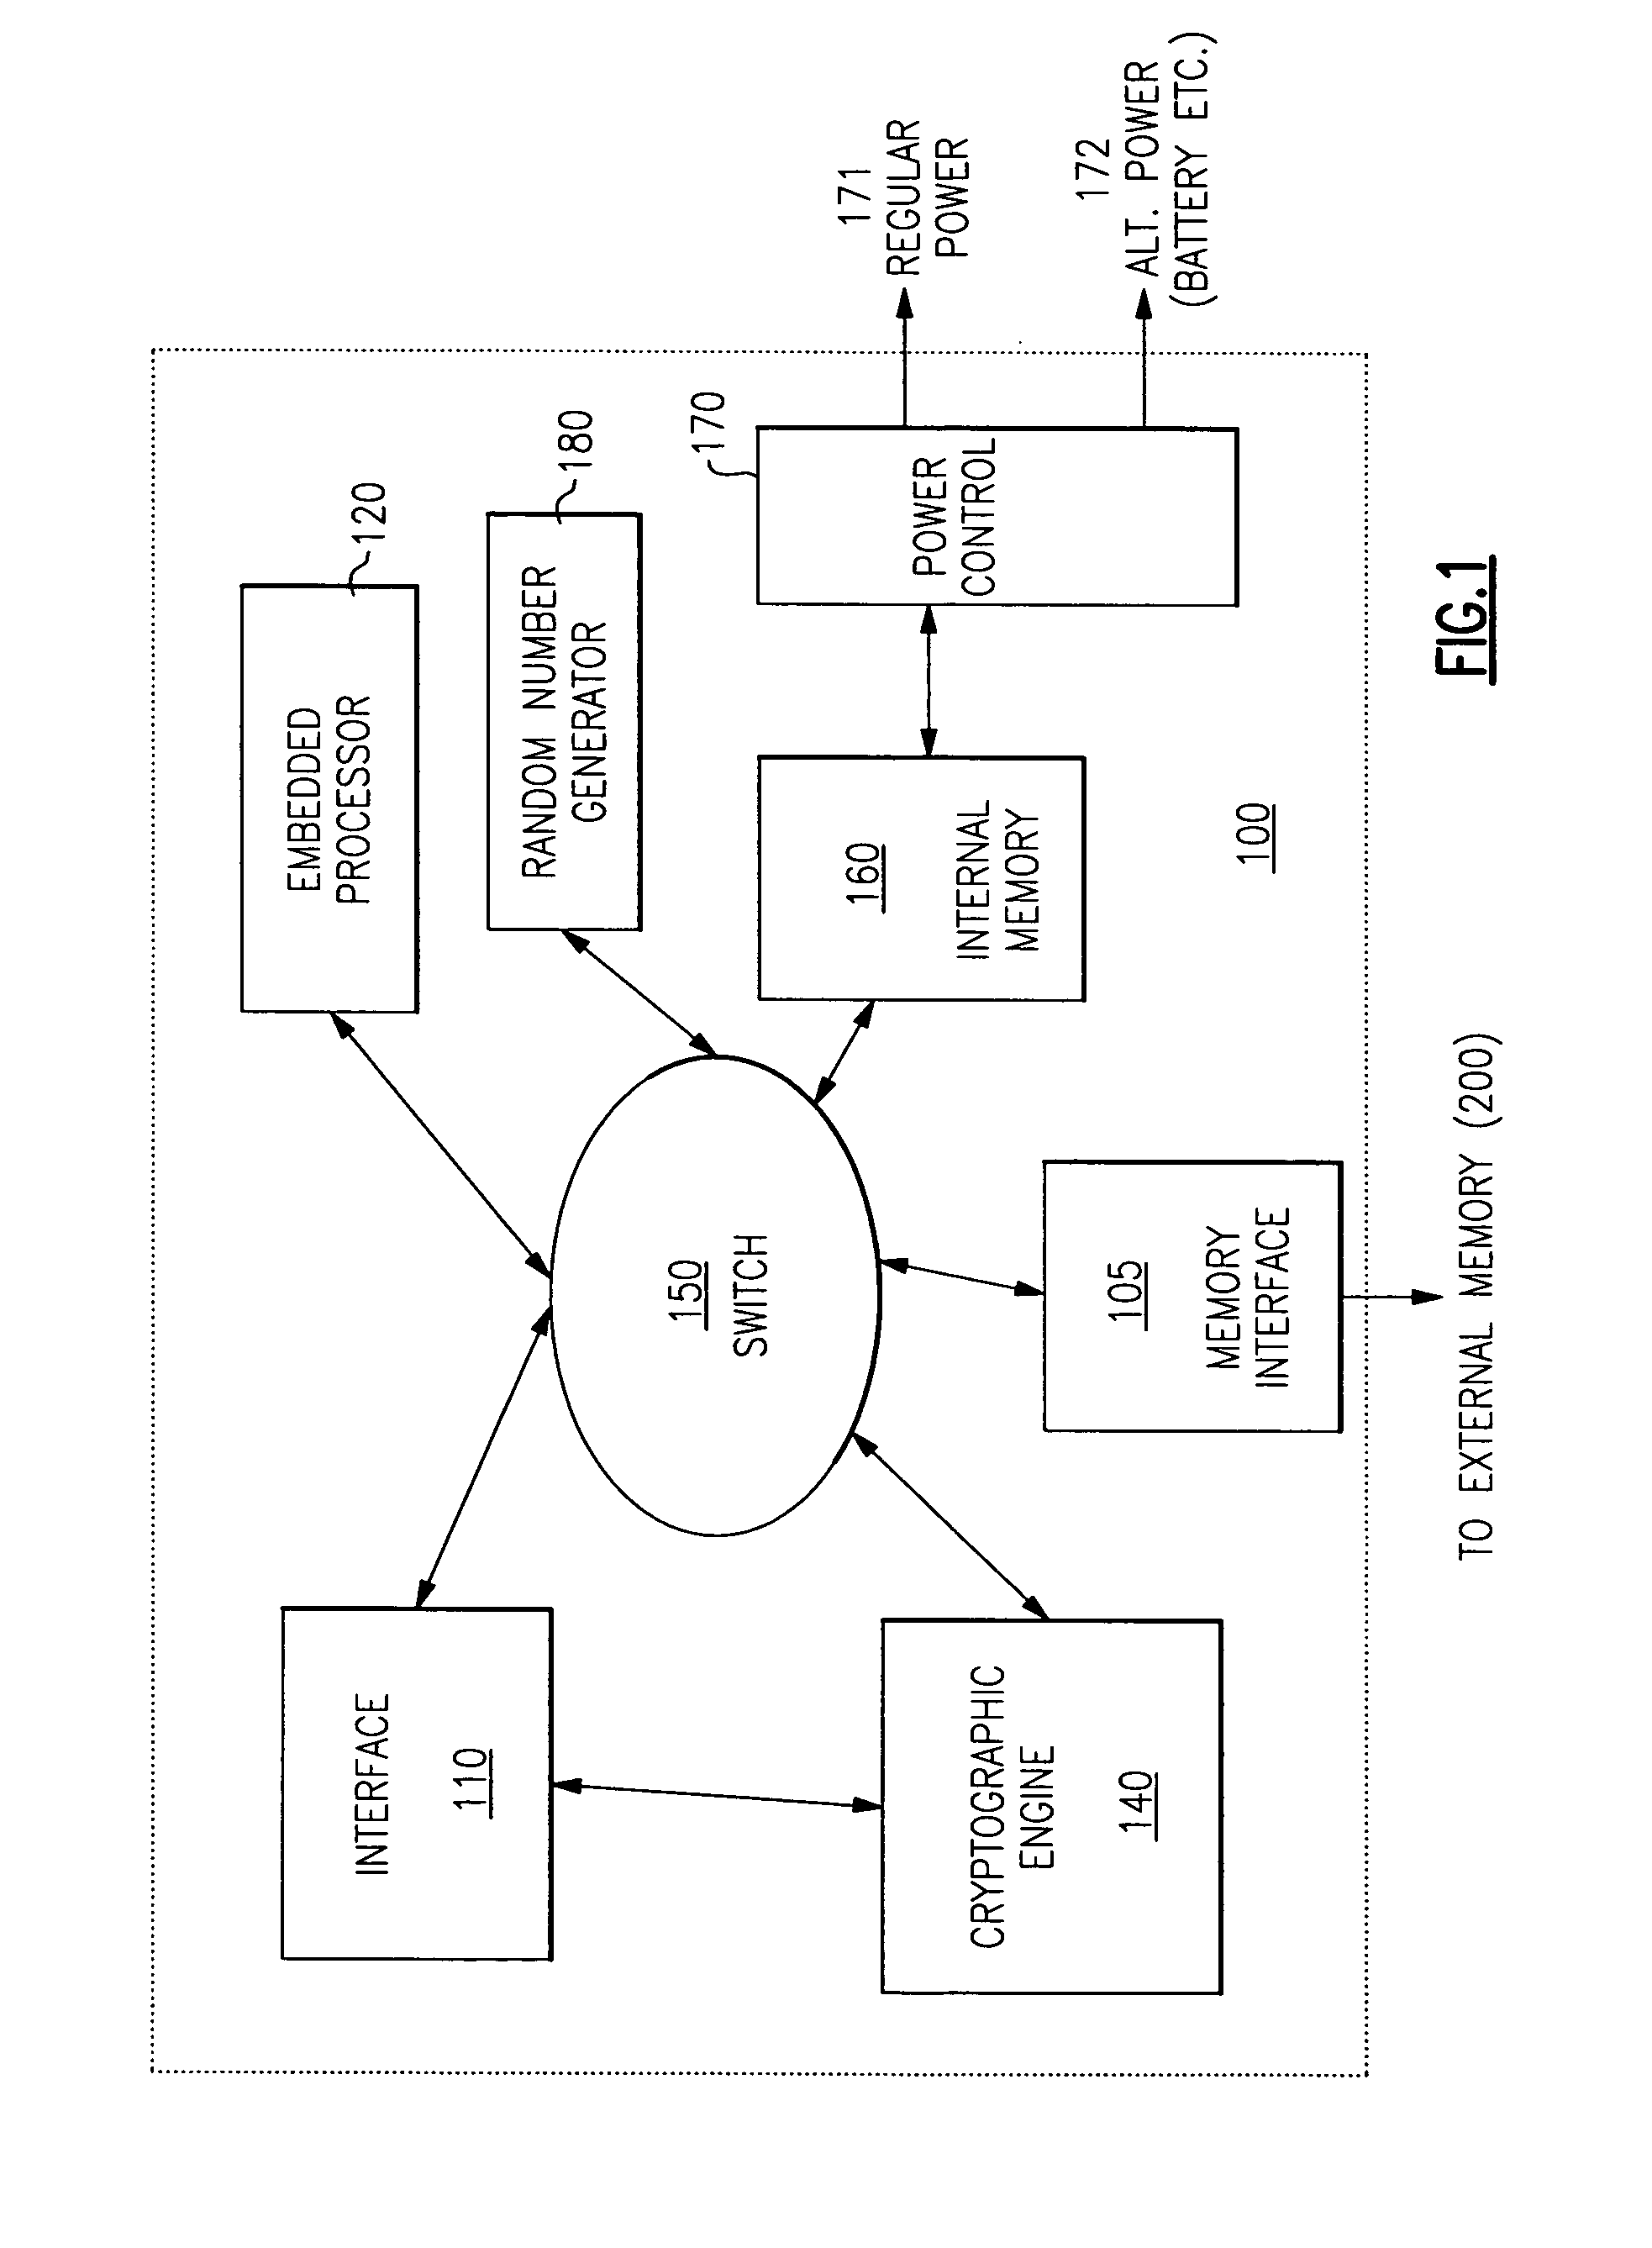 Fault isolation and availability mechanism for multi-processor system